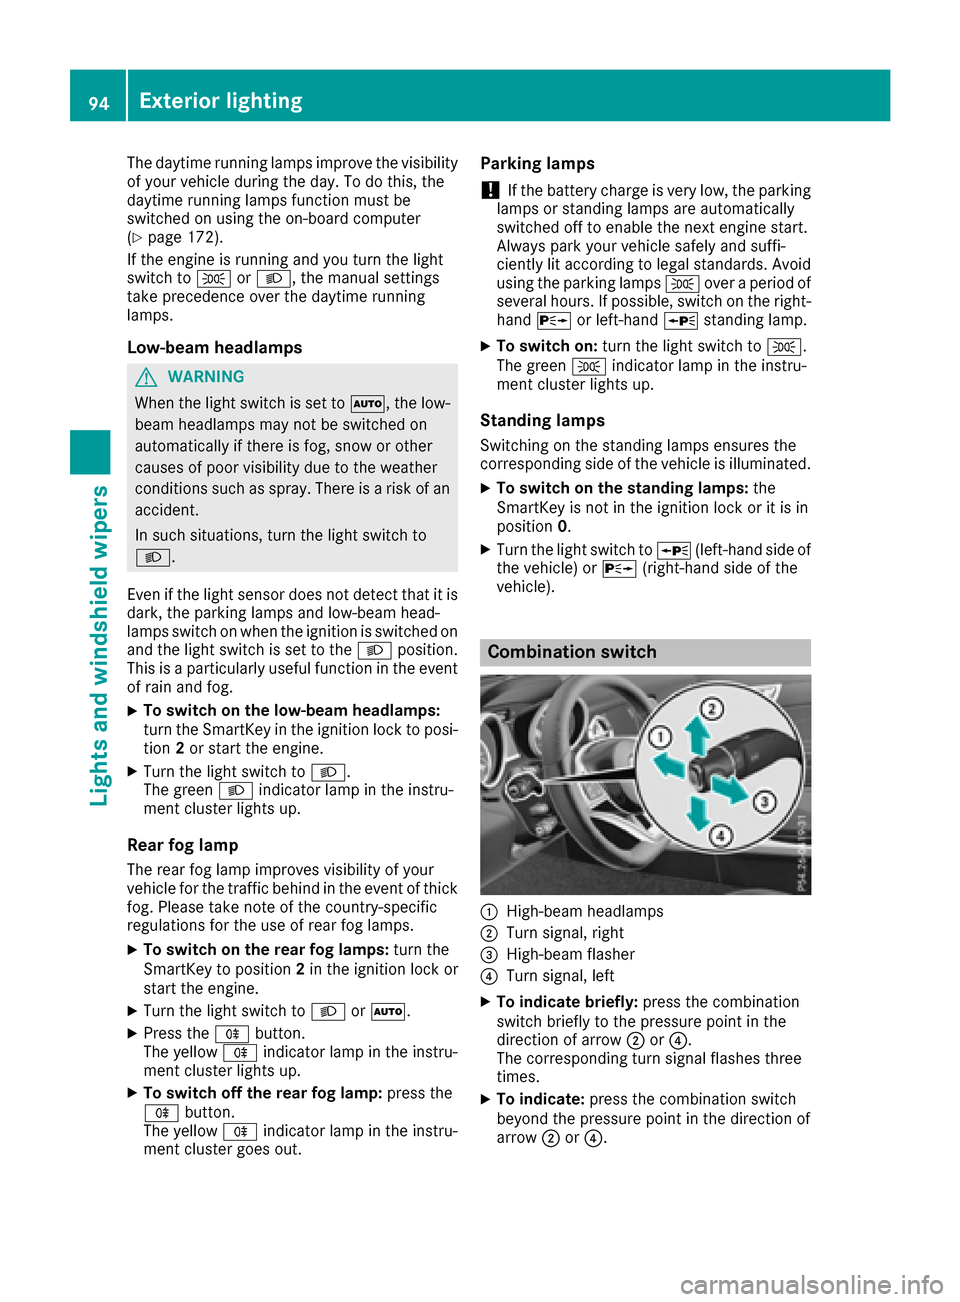 MERCEDES-BENZ SLC-Class 2017 R172 Owners Manual The daytime runninglamps improve the visibility
of your vehicle during the day. To do this, the
daytime runnin glamps function must be
switched on using the on-board computer
(
Ypage 172).
If the engi